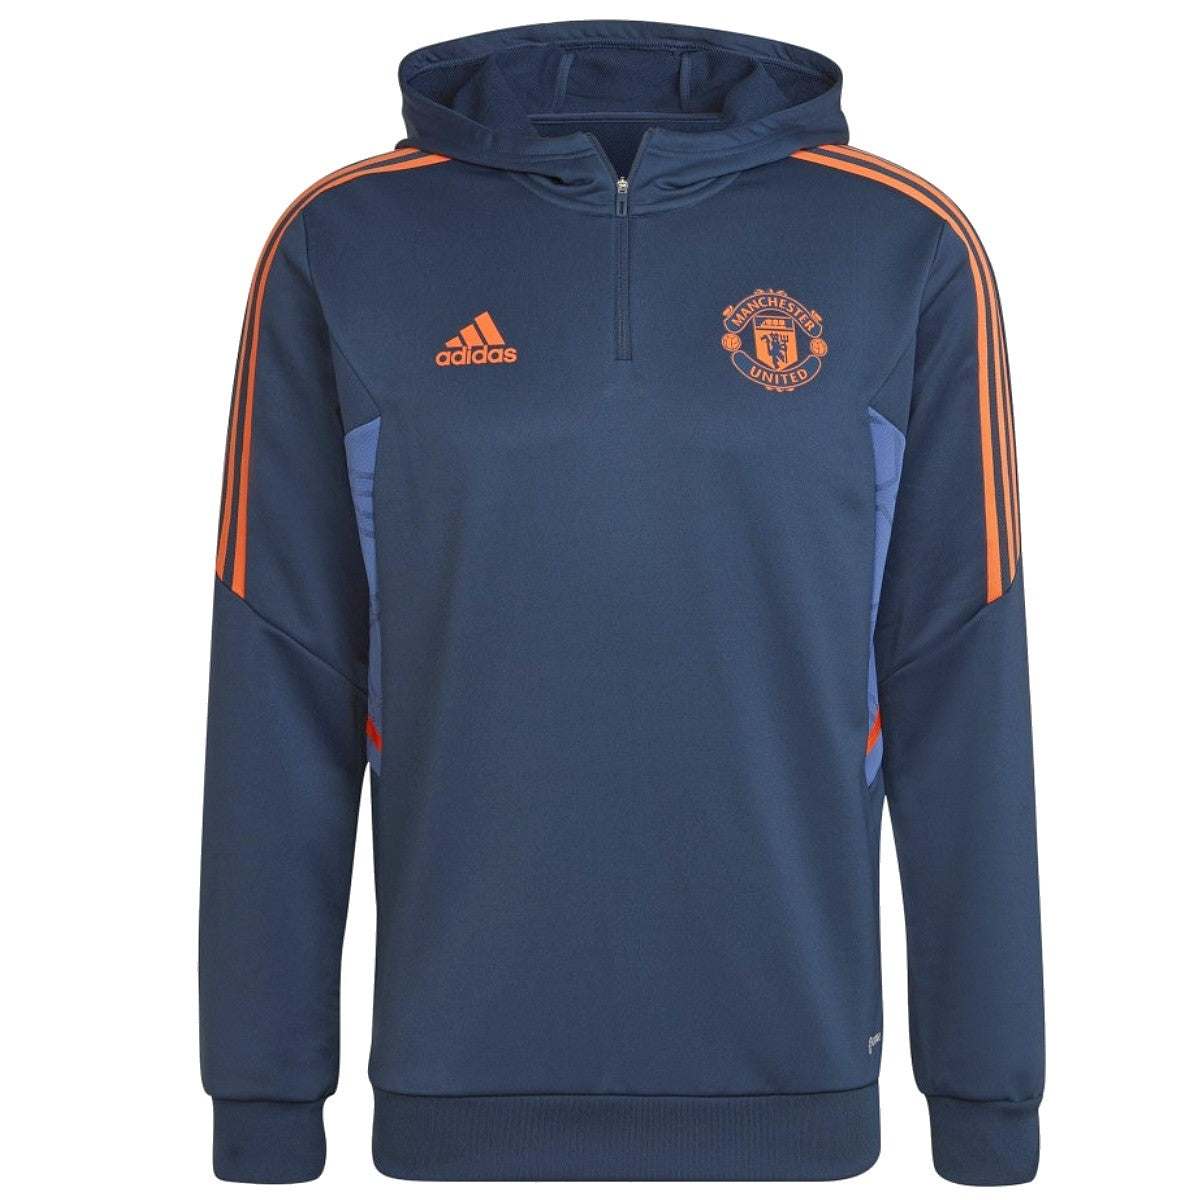 Señal garrapata cliente Manchester United hooded training technical soccer tracksuit 2022/23 -  Adidas – SoccerTracksuits.com